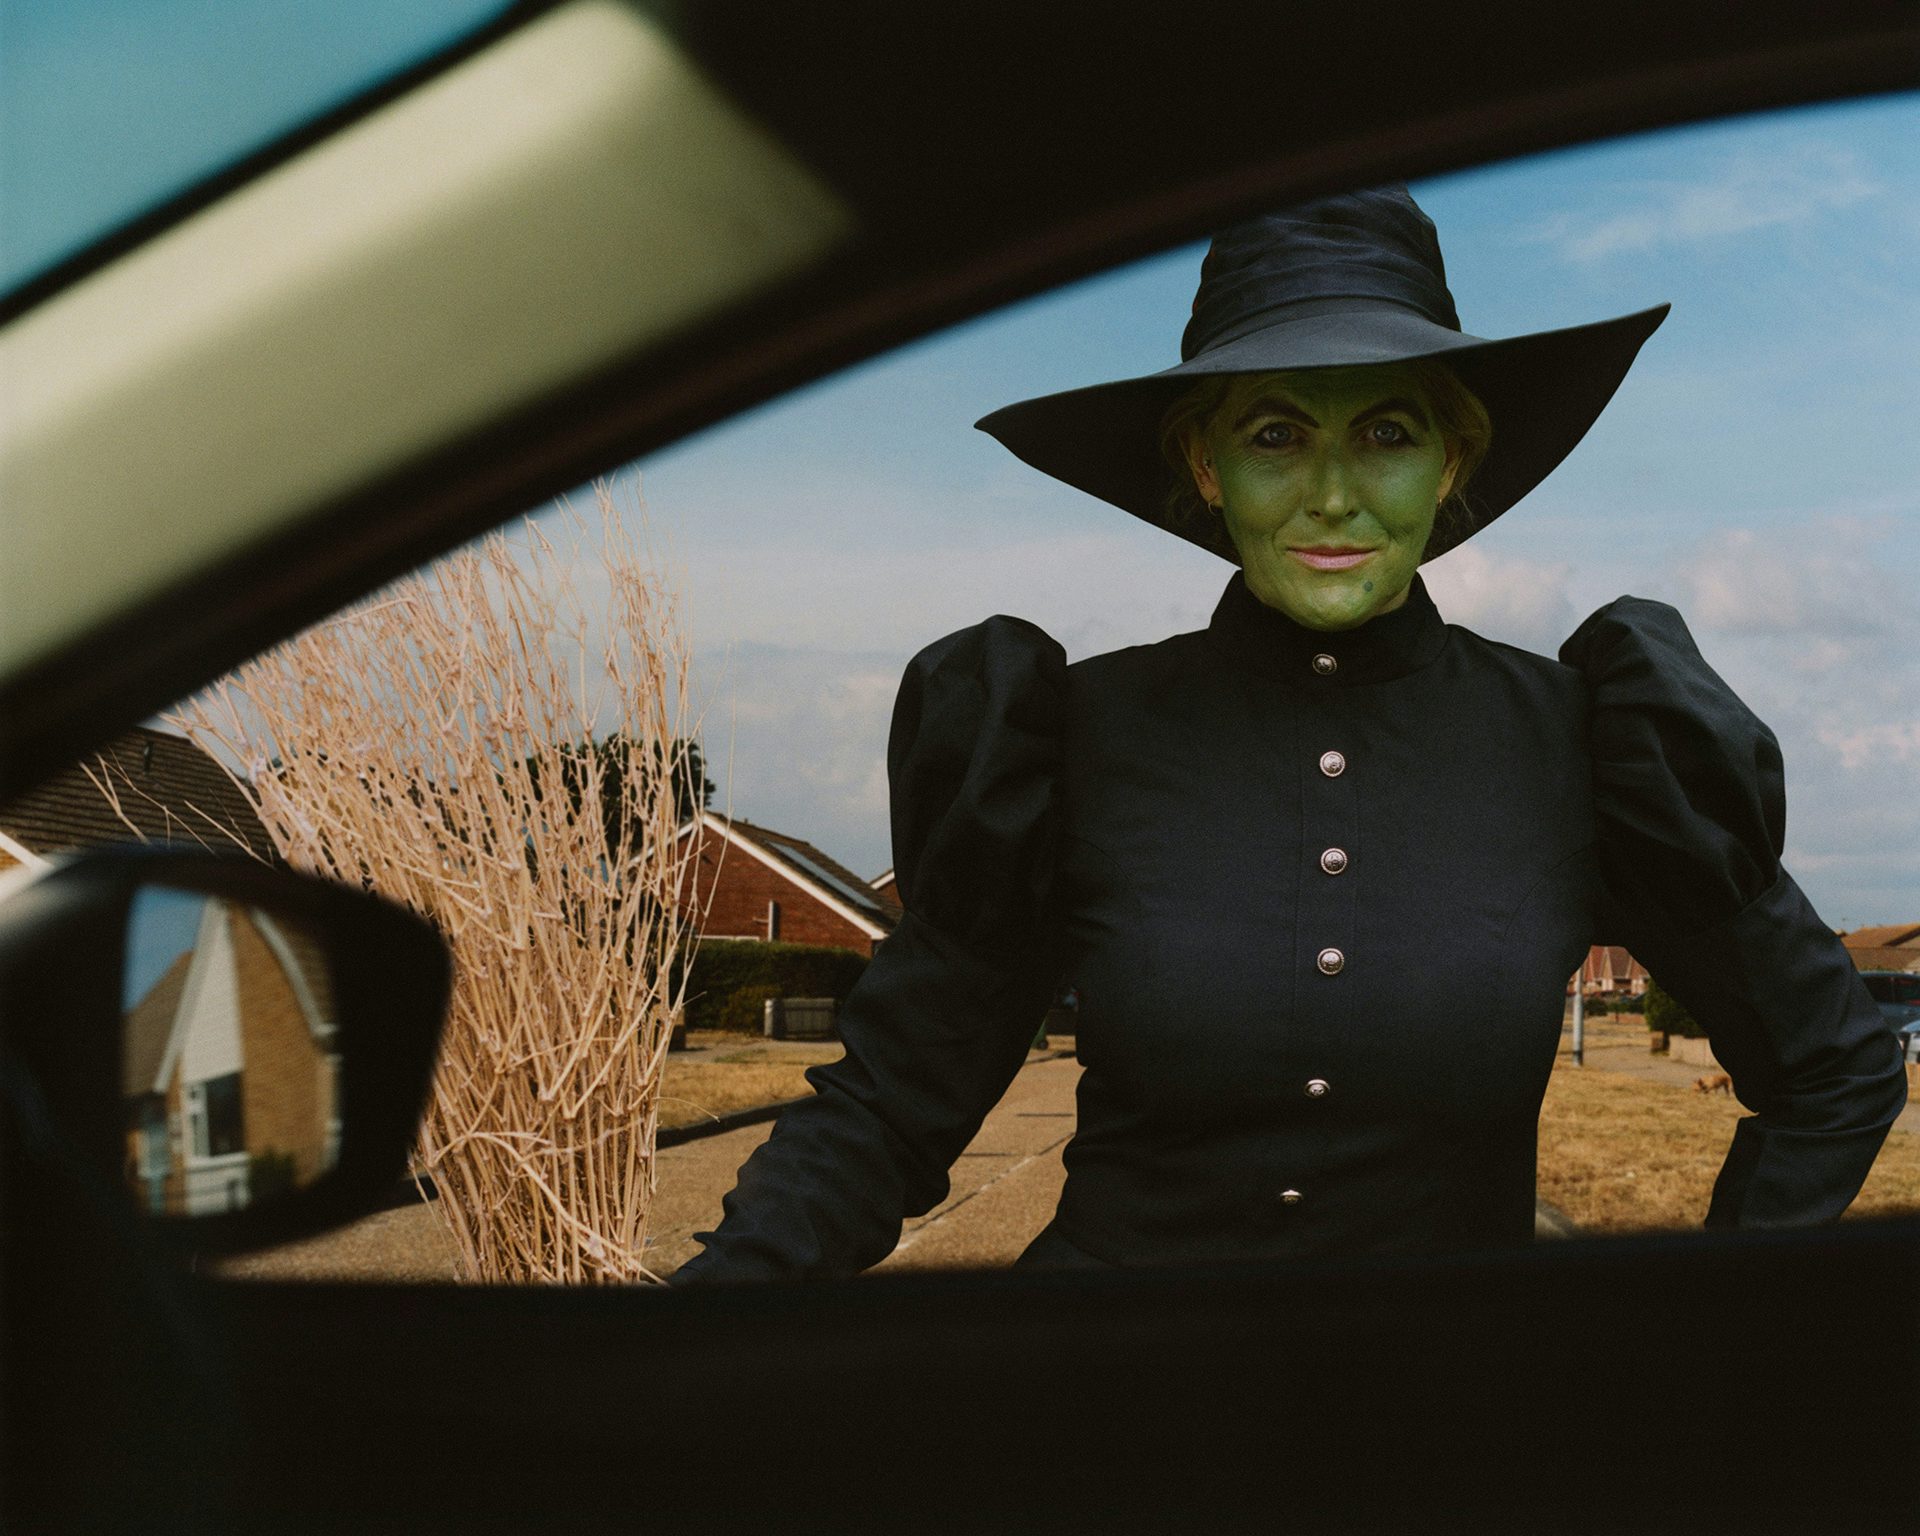 Photograph of a cosplayer as Wicked Witch of the West in Kids of Cosplay by Thurstan Redding